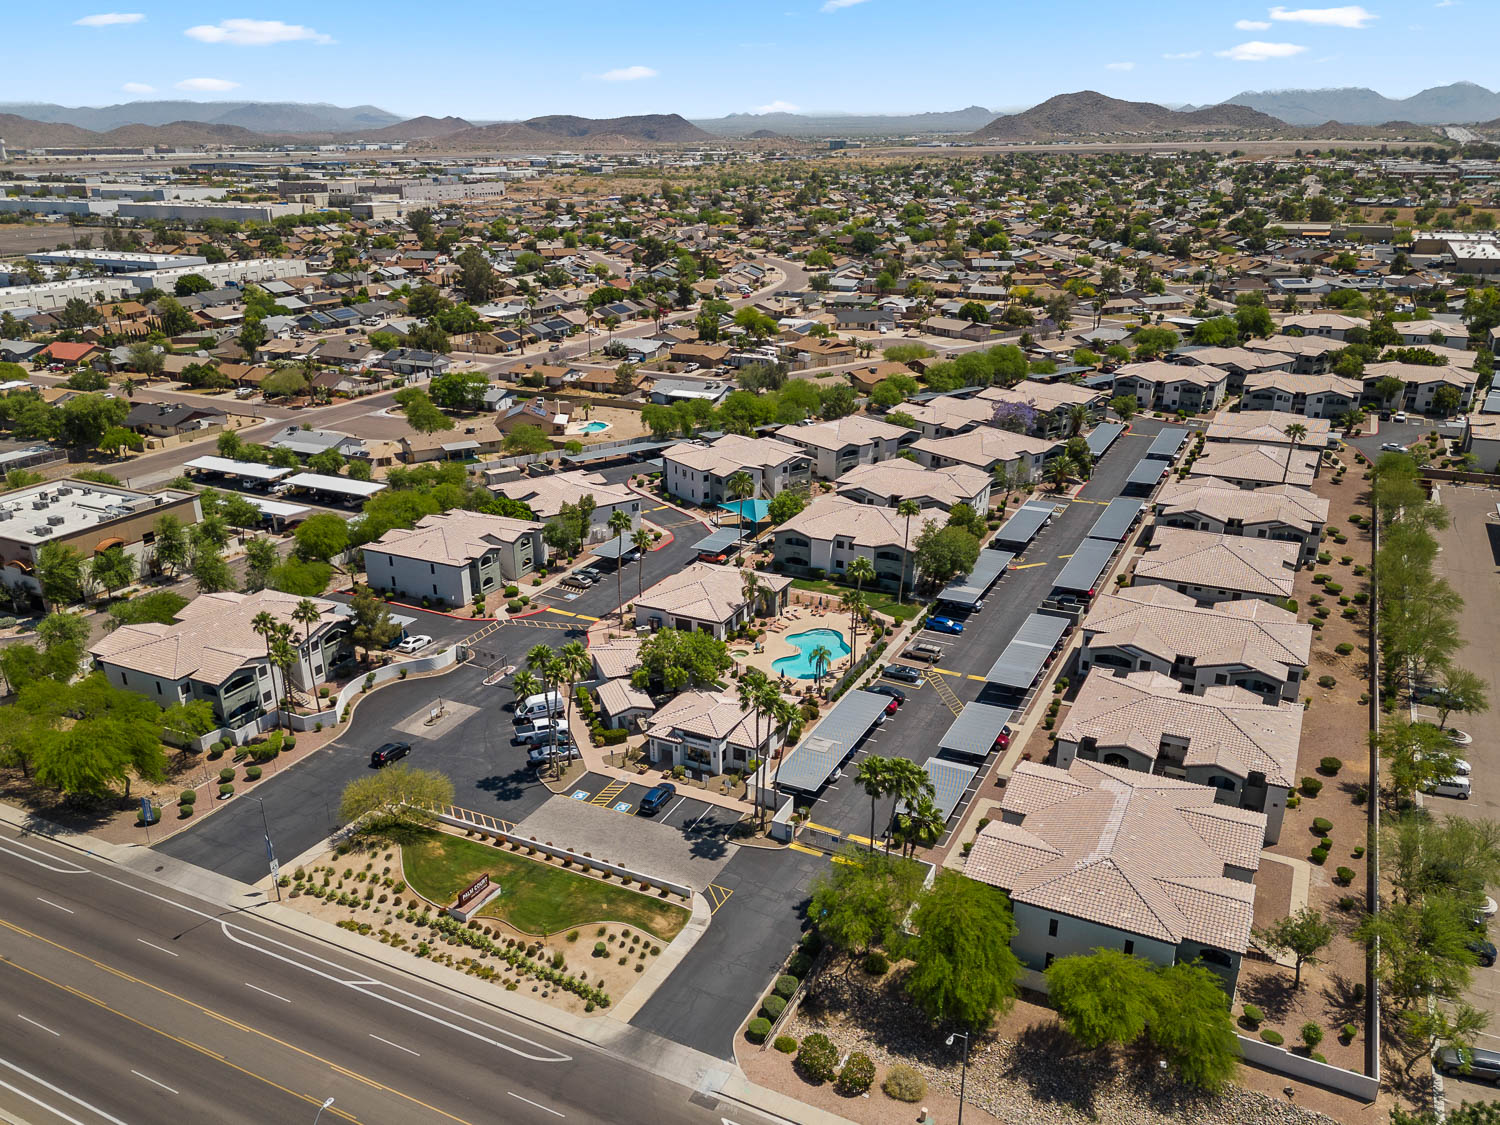 Aerial view of property with lots of covered parking and desert landscaping, mountains in the distance